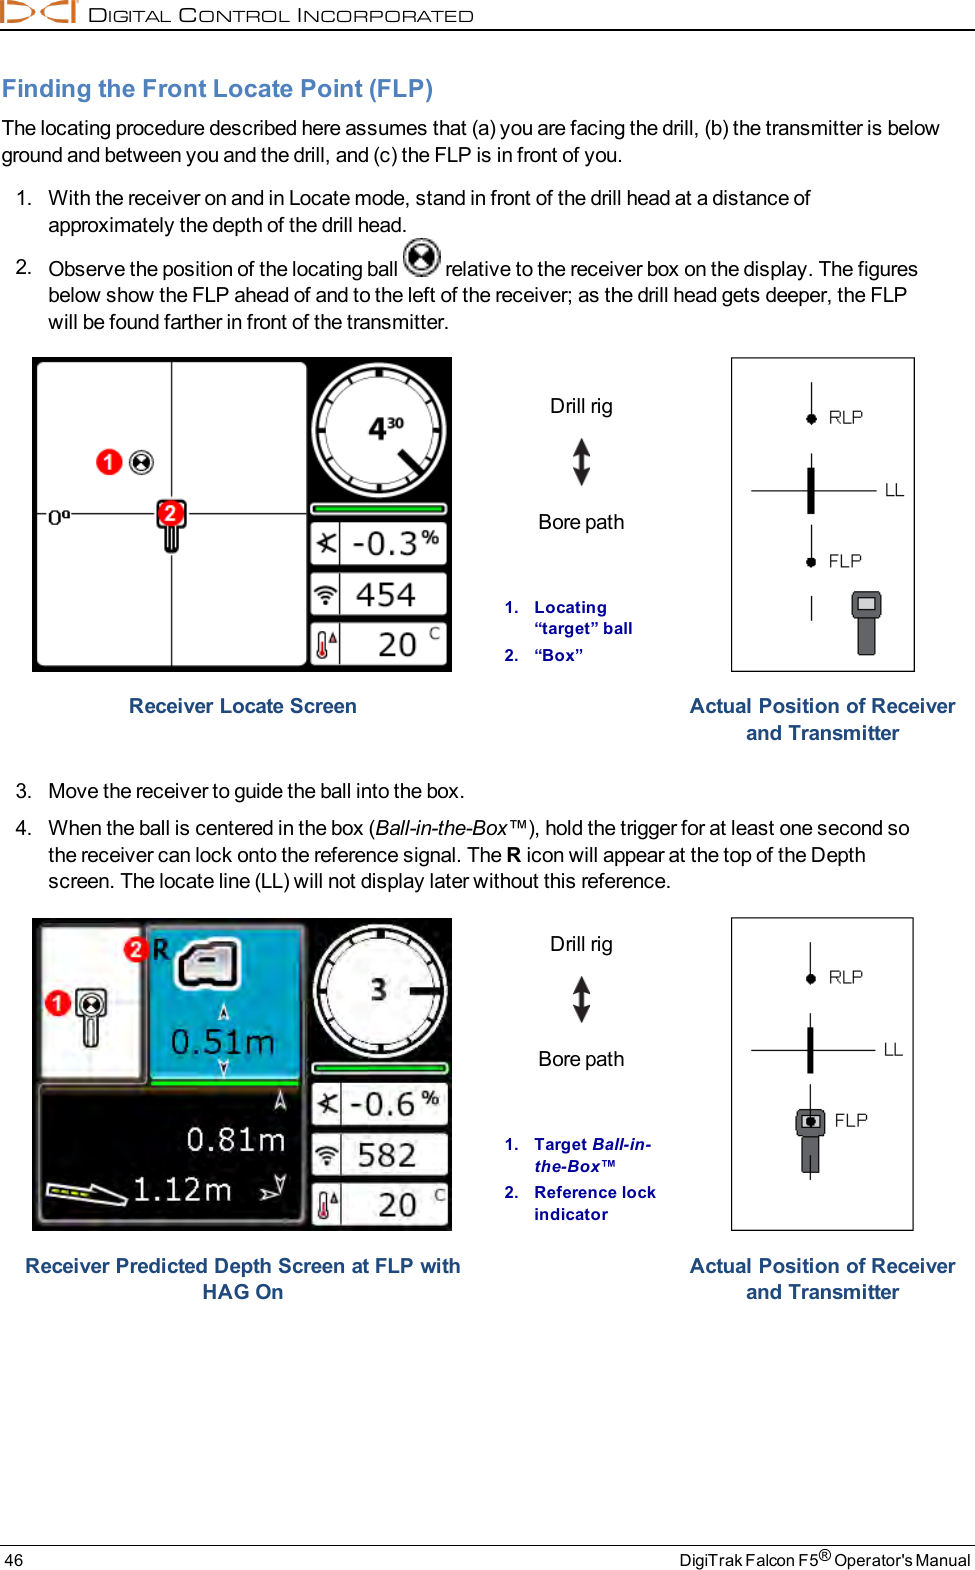 DIGITALCONTROLINCORPORATED46 DigiTrak Falcon F5®Operator&apos;s ManualFinding the Front Locate Point (FLP)The locating procedure described here assumes that (a) you are facing the drill, (b) the transmitter is belowground and between you and the drill, and (c) the FLP is in front of you.1. With the receiver on and in Locate mode, stand in front of the drill head at a distance ofapproximately the depth of the drill head.2. Observe the position of the locating ball relative to the receiver box on the display. The figuresbelow show the FLP ahead of and to the left of the receiver; as the drill head gets deeper, the FLPwill be found farther in front of the transmitter.Drill rigBore path1. Locating“target” ball2. “Box”Receiver Locate Screen Actual Position of Receiverand Transmitter3. Move the receiver to guide the ball into the box.4. When the ball is centered in the box (Ball-in-the-Box™), hold the trigger for at least one second sothe receiver can lock onto the reference signal. The Ricon will appear at the top of the Depthscreen. The locate line (LL) will not display later without this reference.Drill rigBore path1. Target Ball-in-the-Box™2. Reference lockindicatorReceiver Predicted Depth Screen at FLP withHAG OnActual Position of Receiverand Transmitter